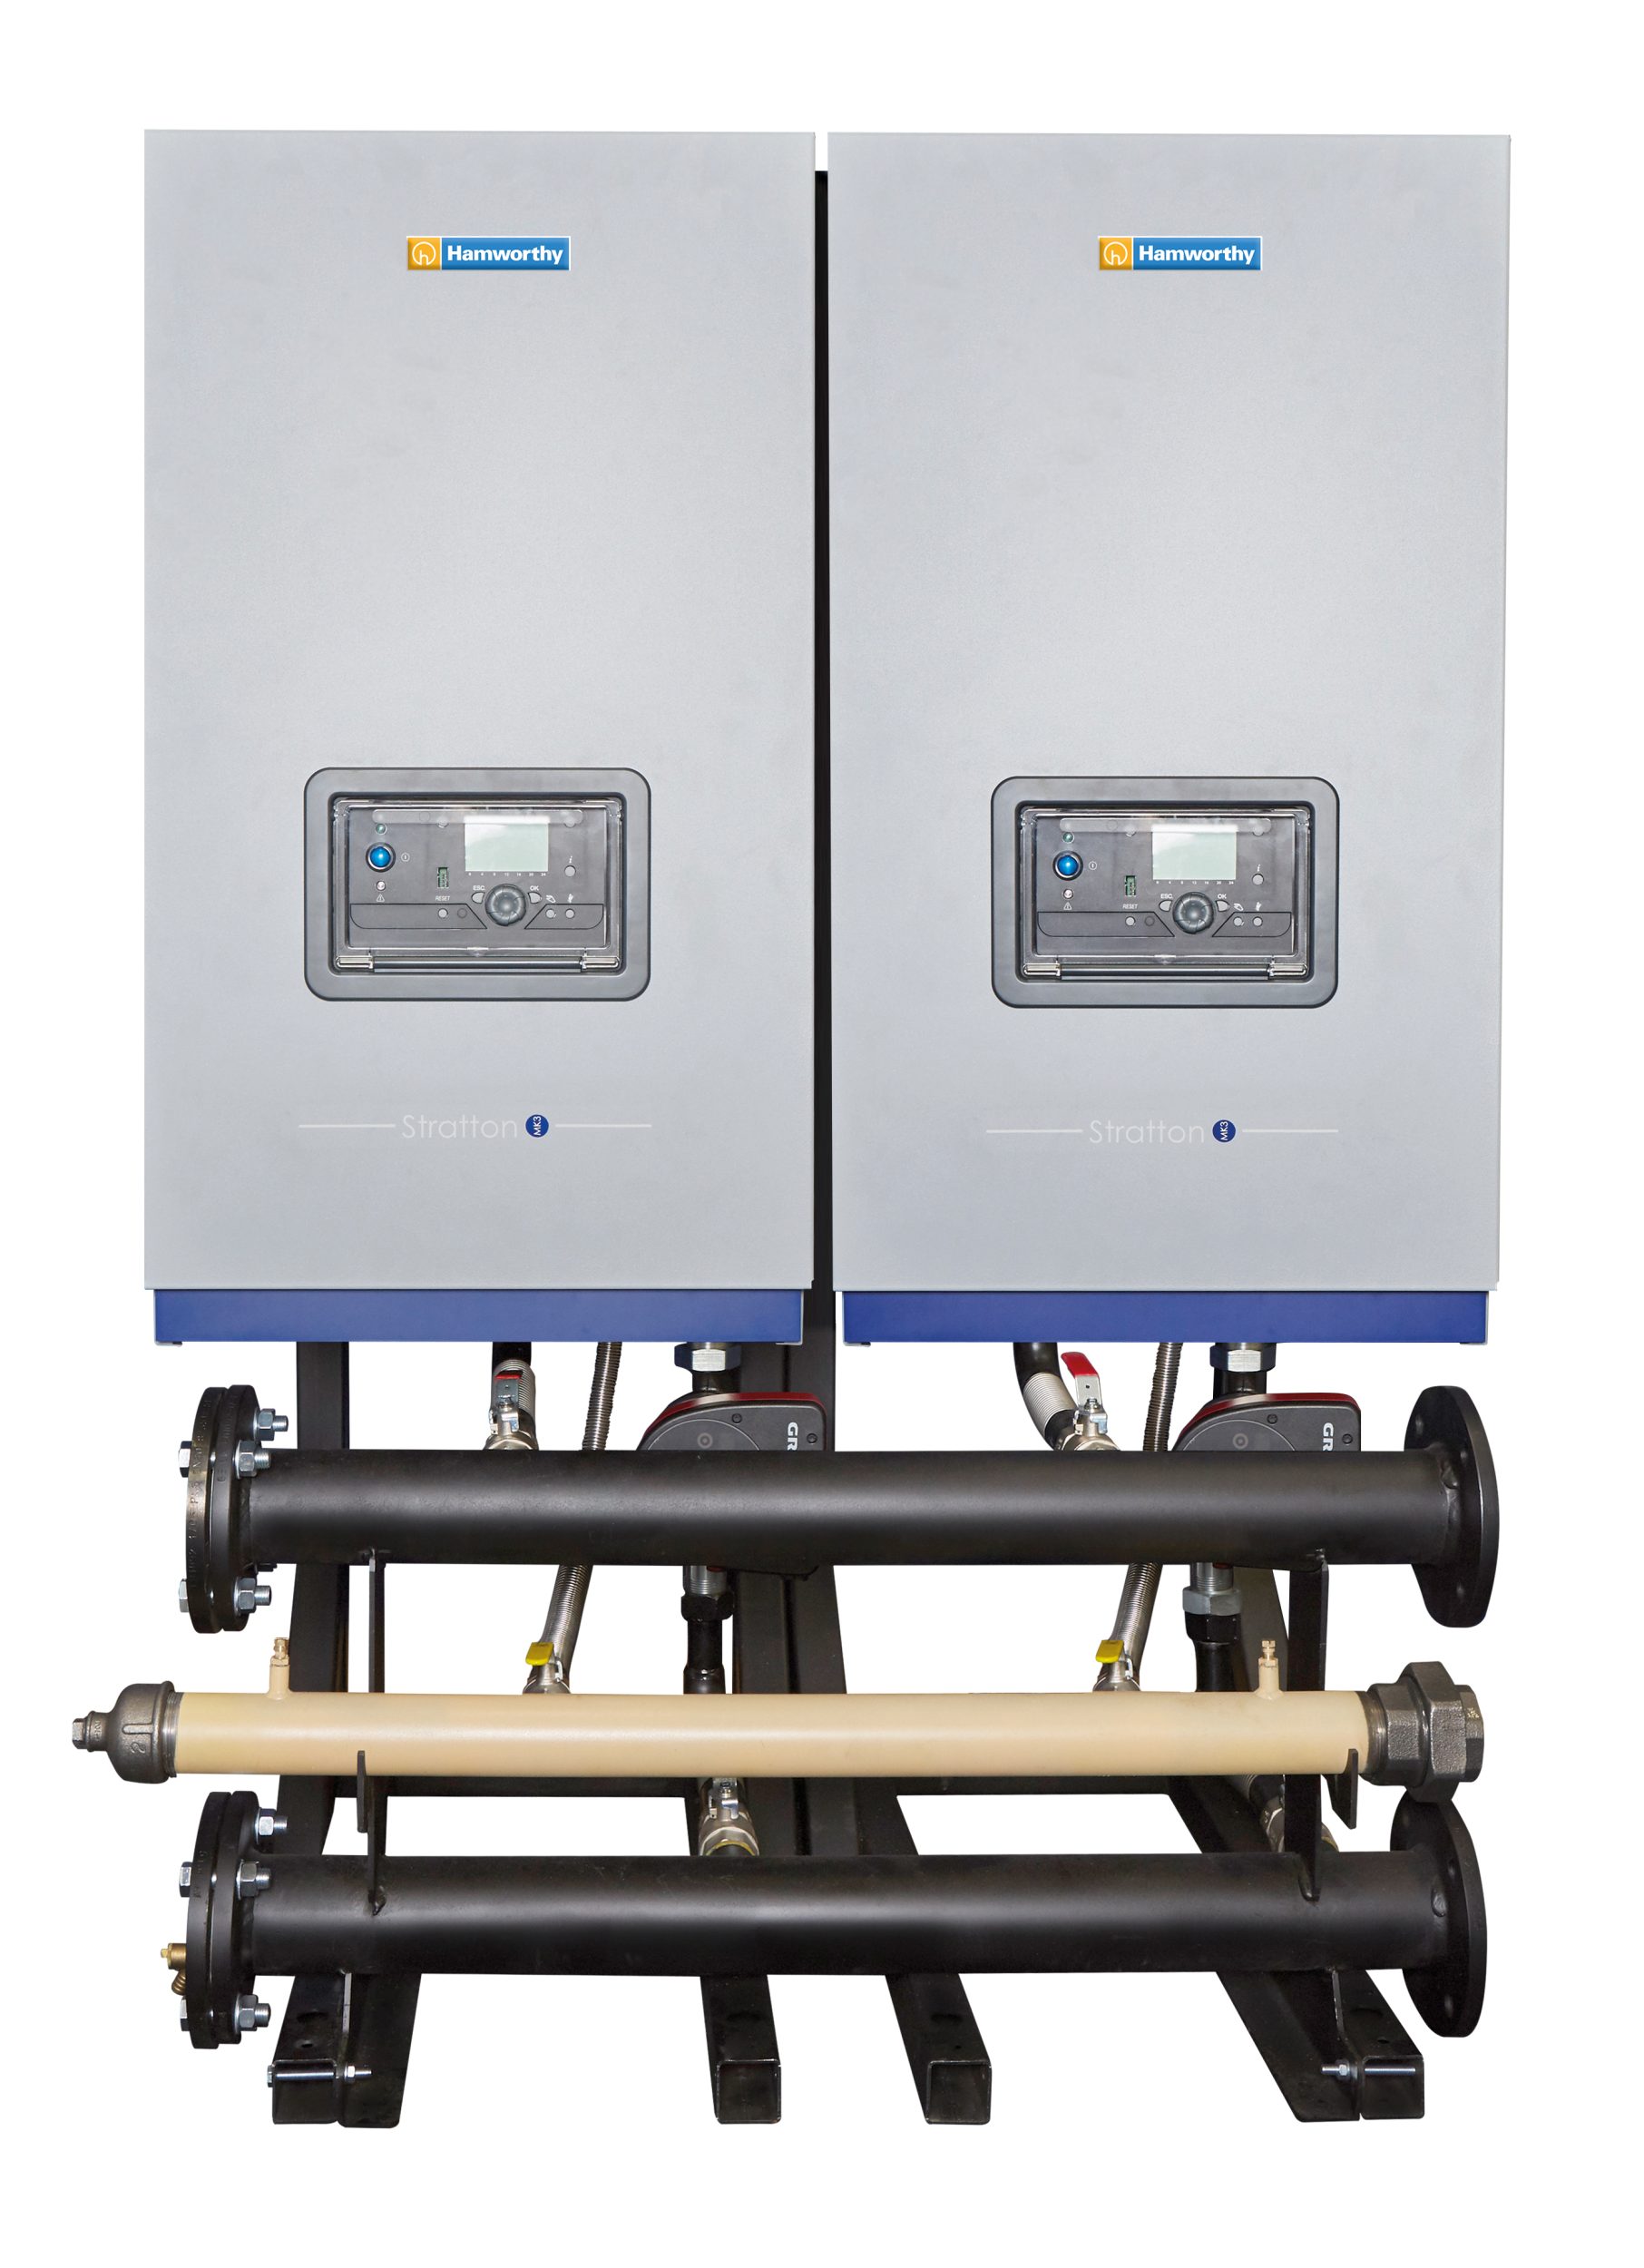 Big things come in small packages… new Stratton mk3 boiler from Hamworthy Heating